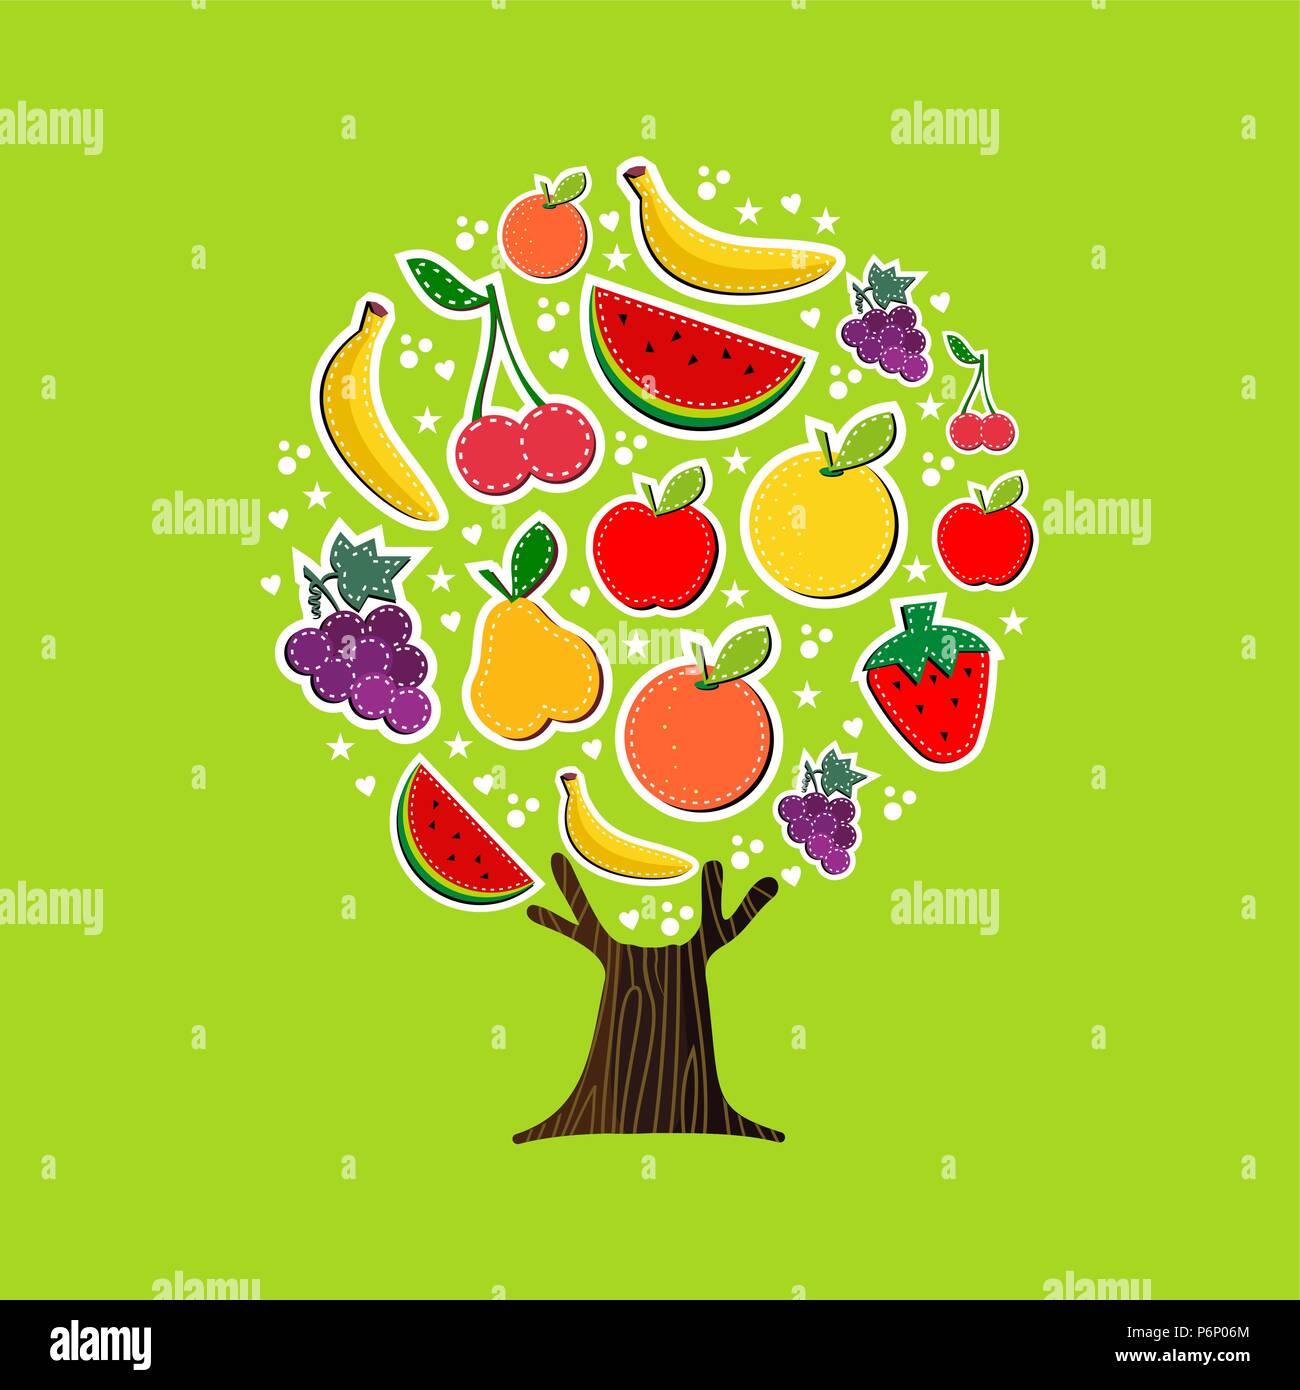 Summer fruit tree made of tropical food, fun summertime vacation concept. Includes watermelon, apple, orange and banana. EPS10 vector. Stock Vector